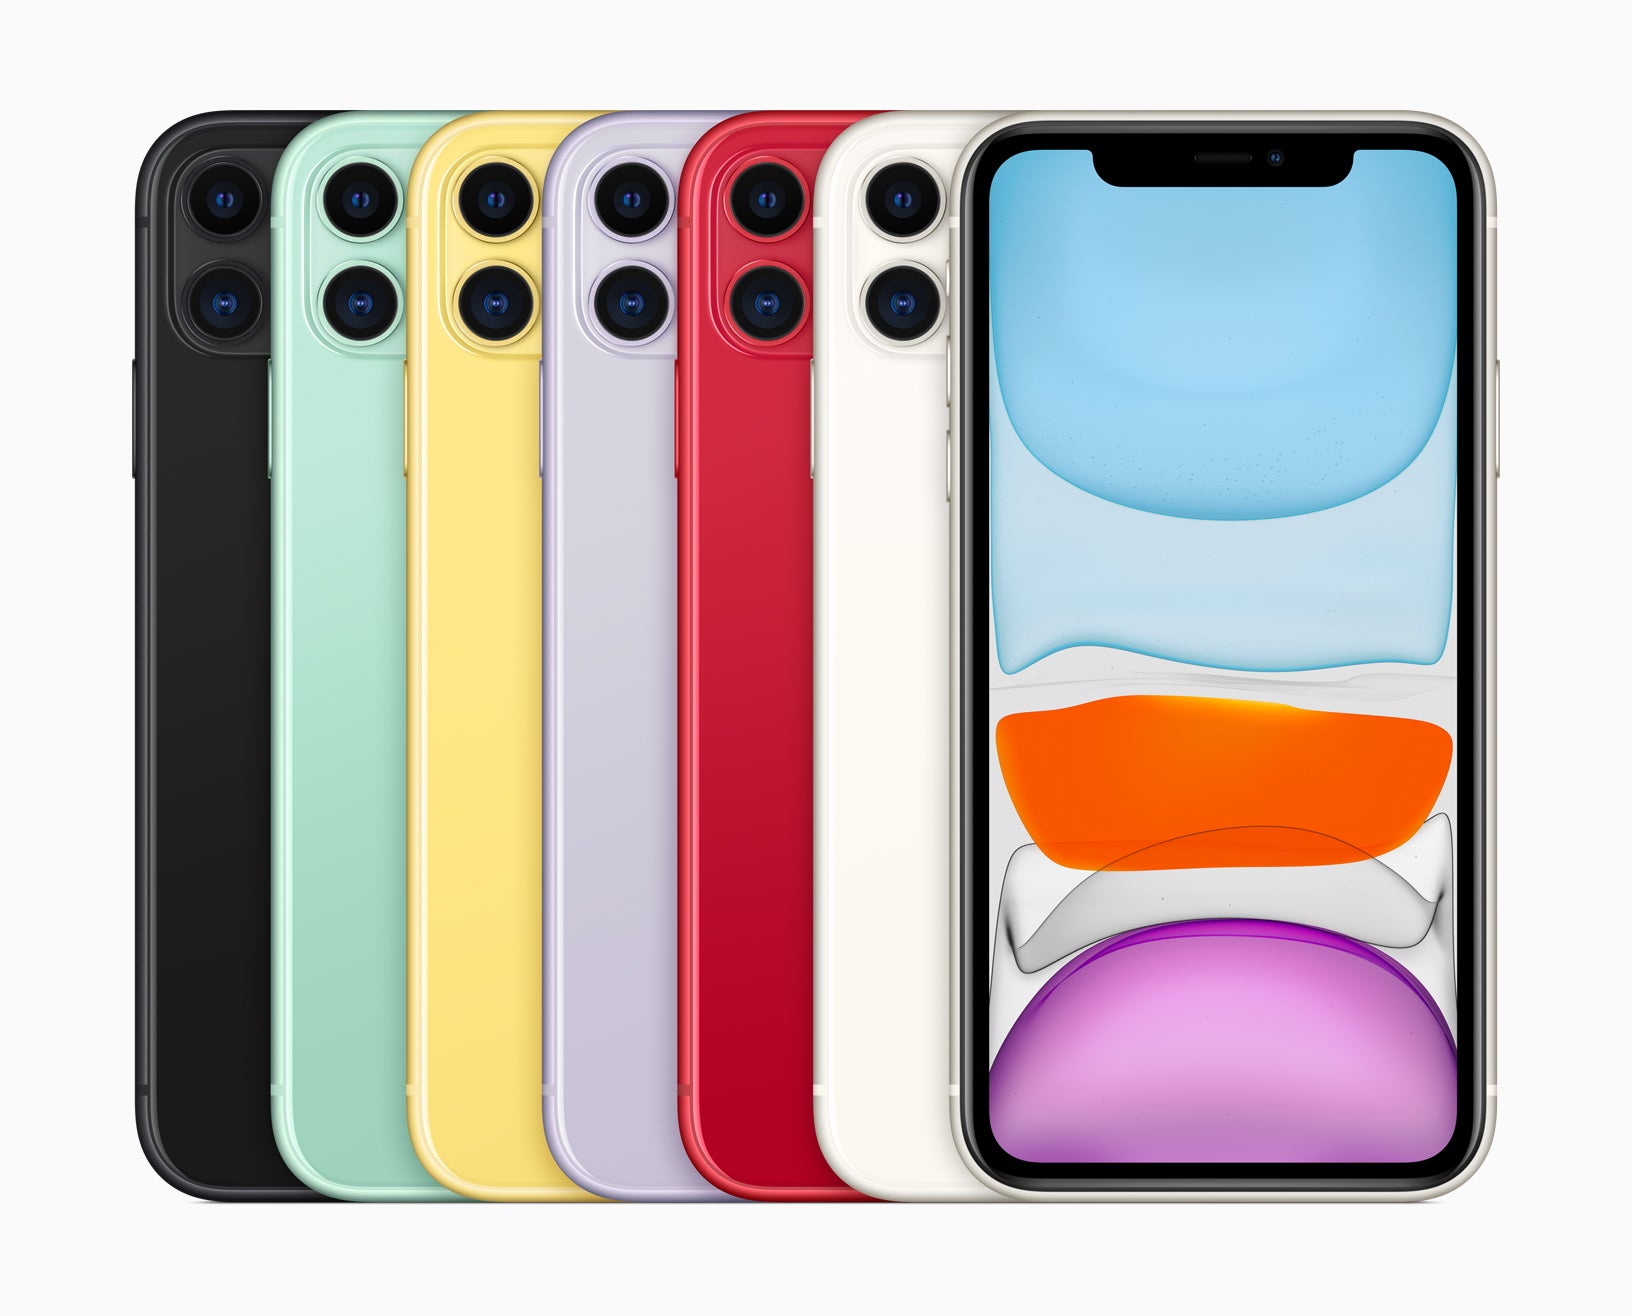 iPhone 11 - Apple announces iPhone 11, iPhone 11 Pro and 11 Pro Max